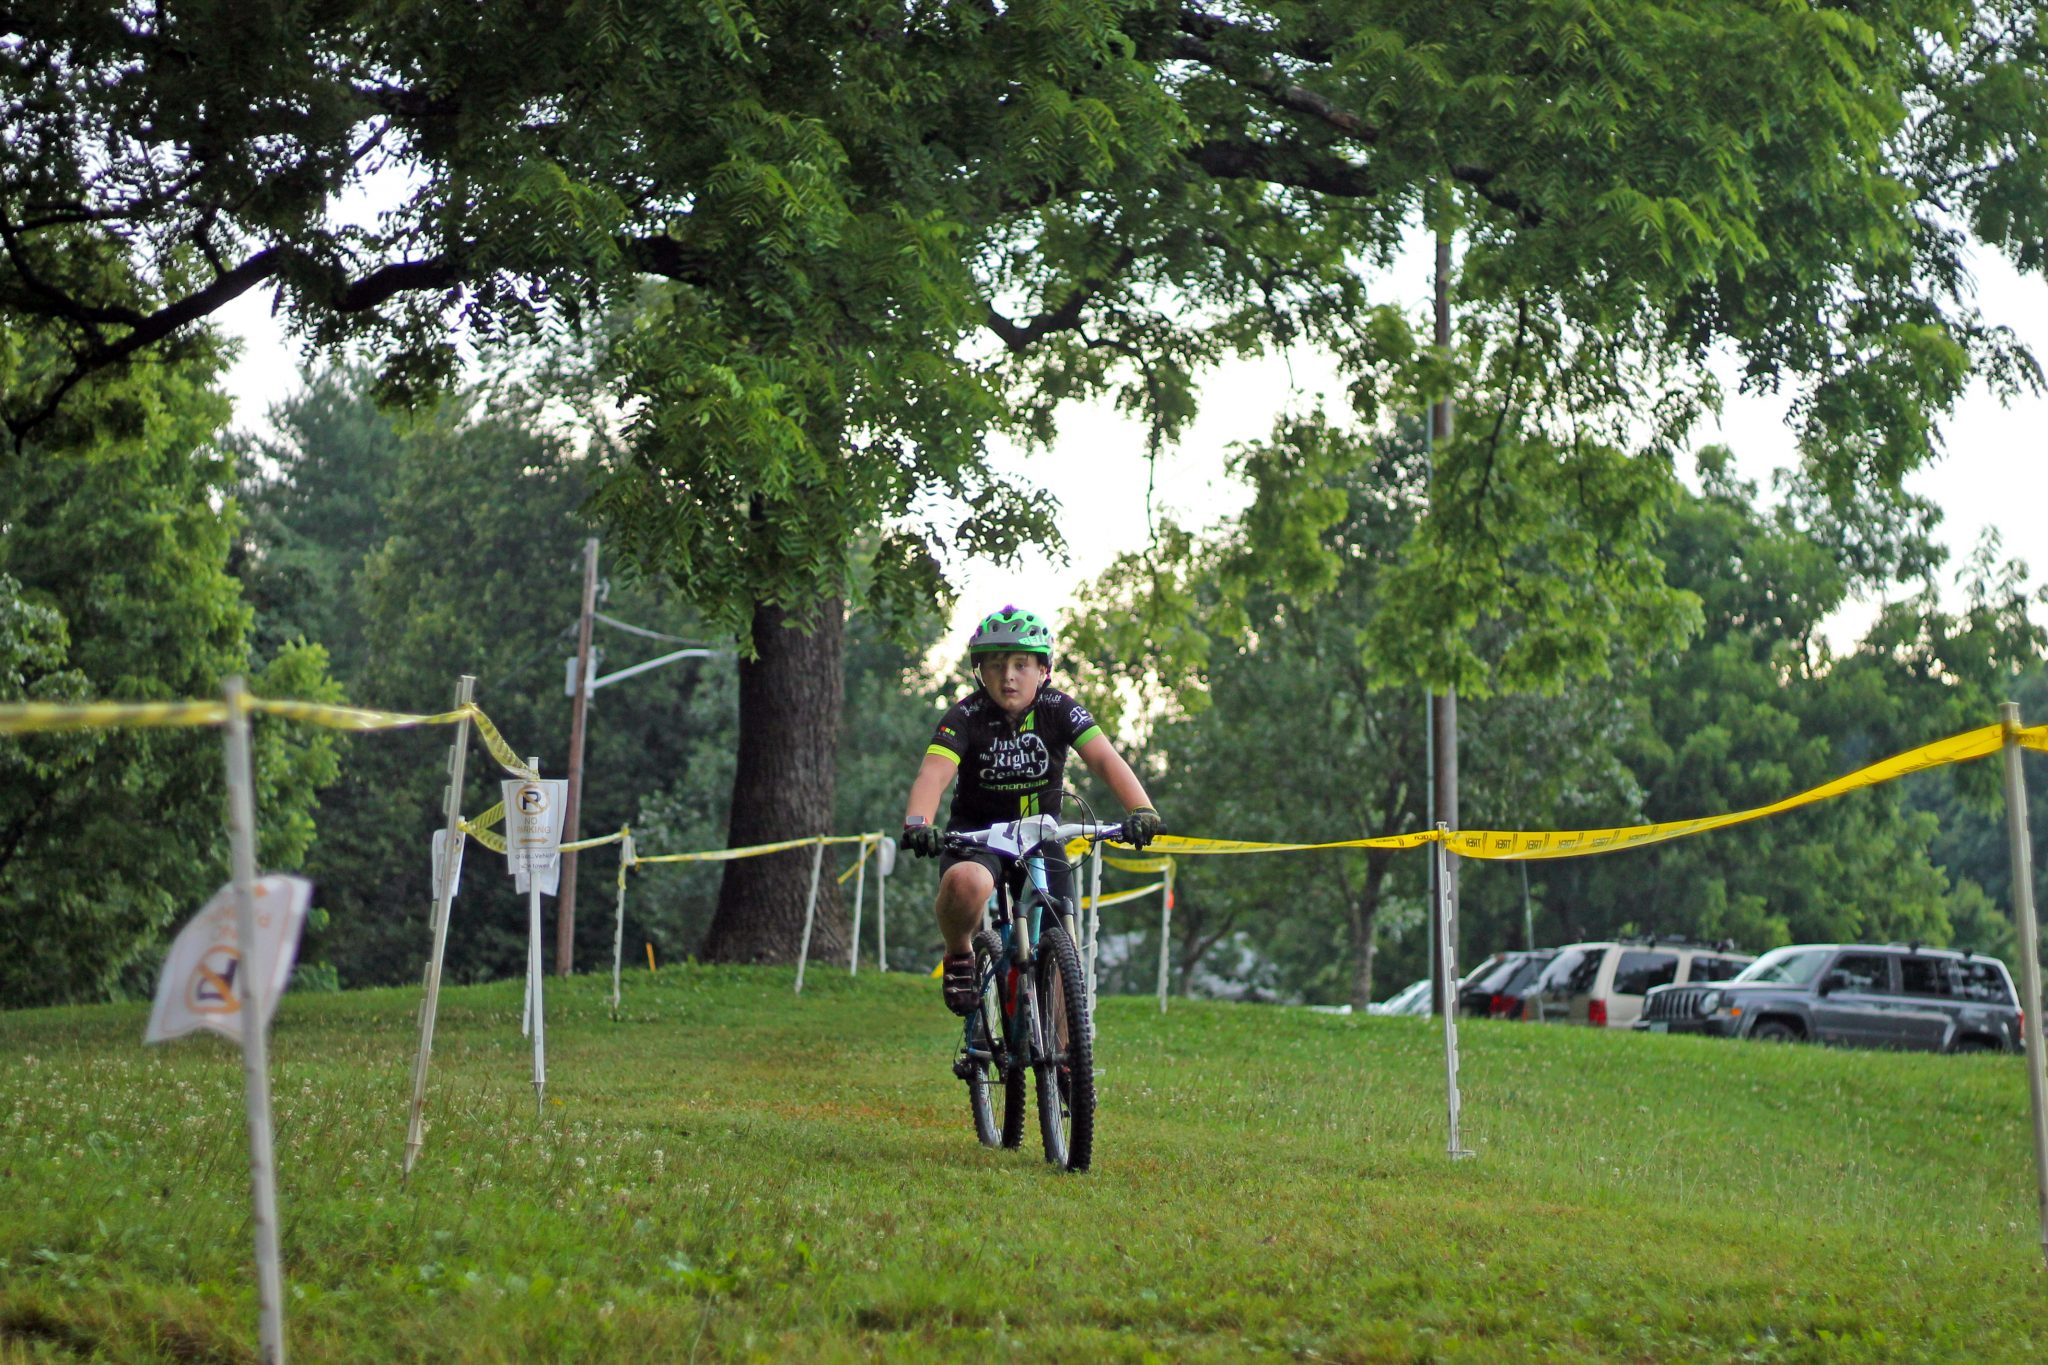 Fishburn youth mountain biker rides down straightaway at the Roanoke Parks and Recreation event